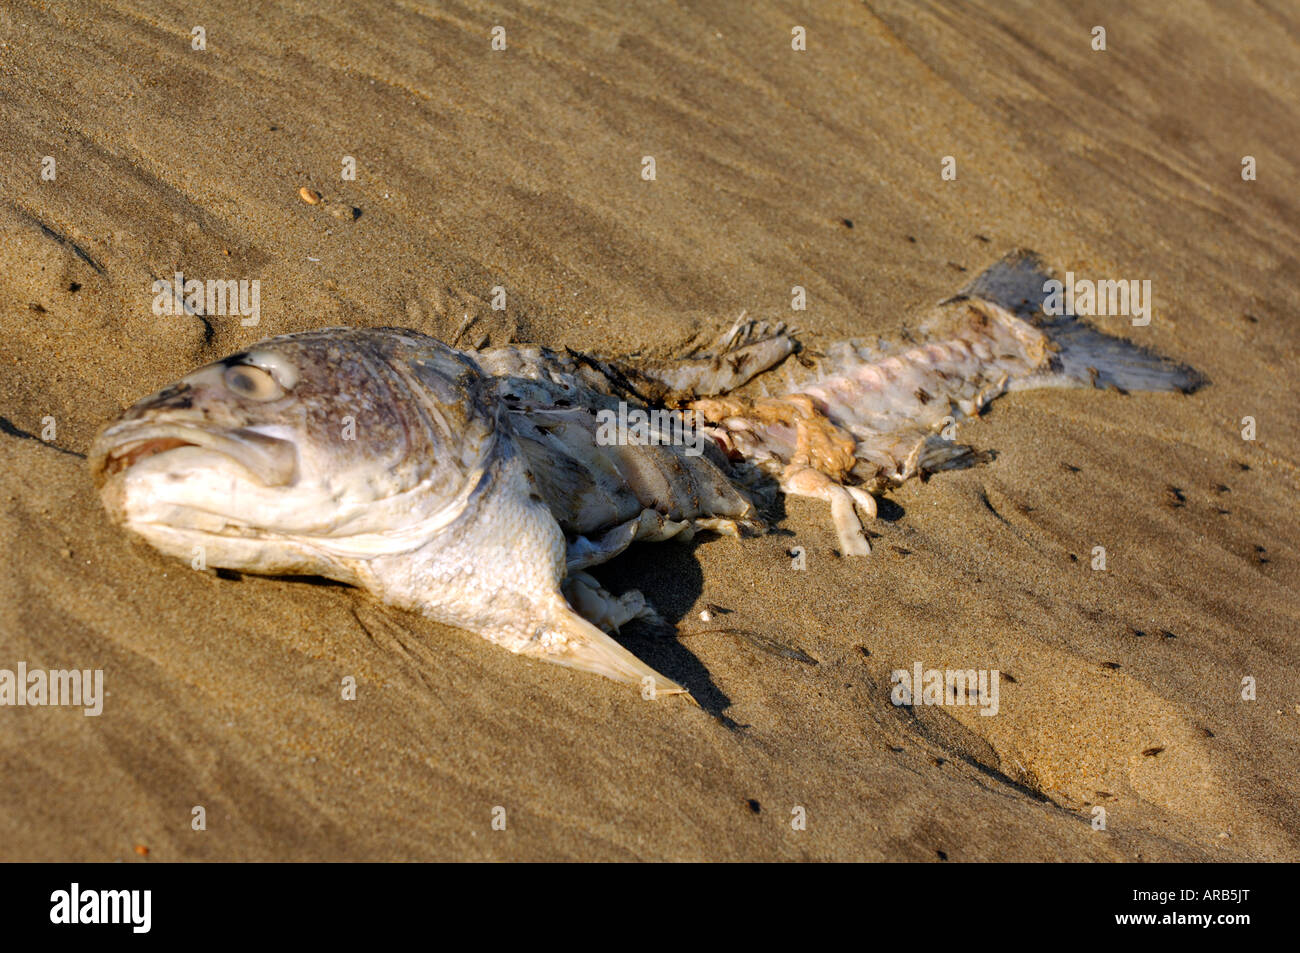 a dead fish decaying rotten foul smelly smelling lying on the